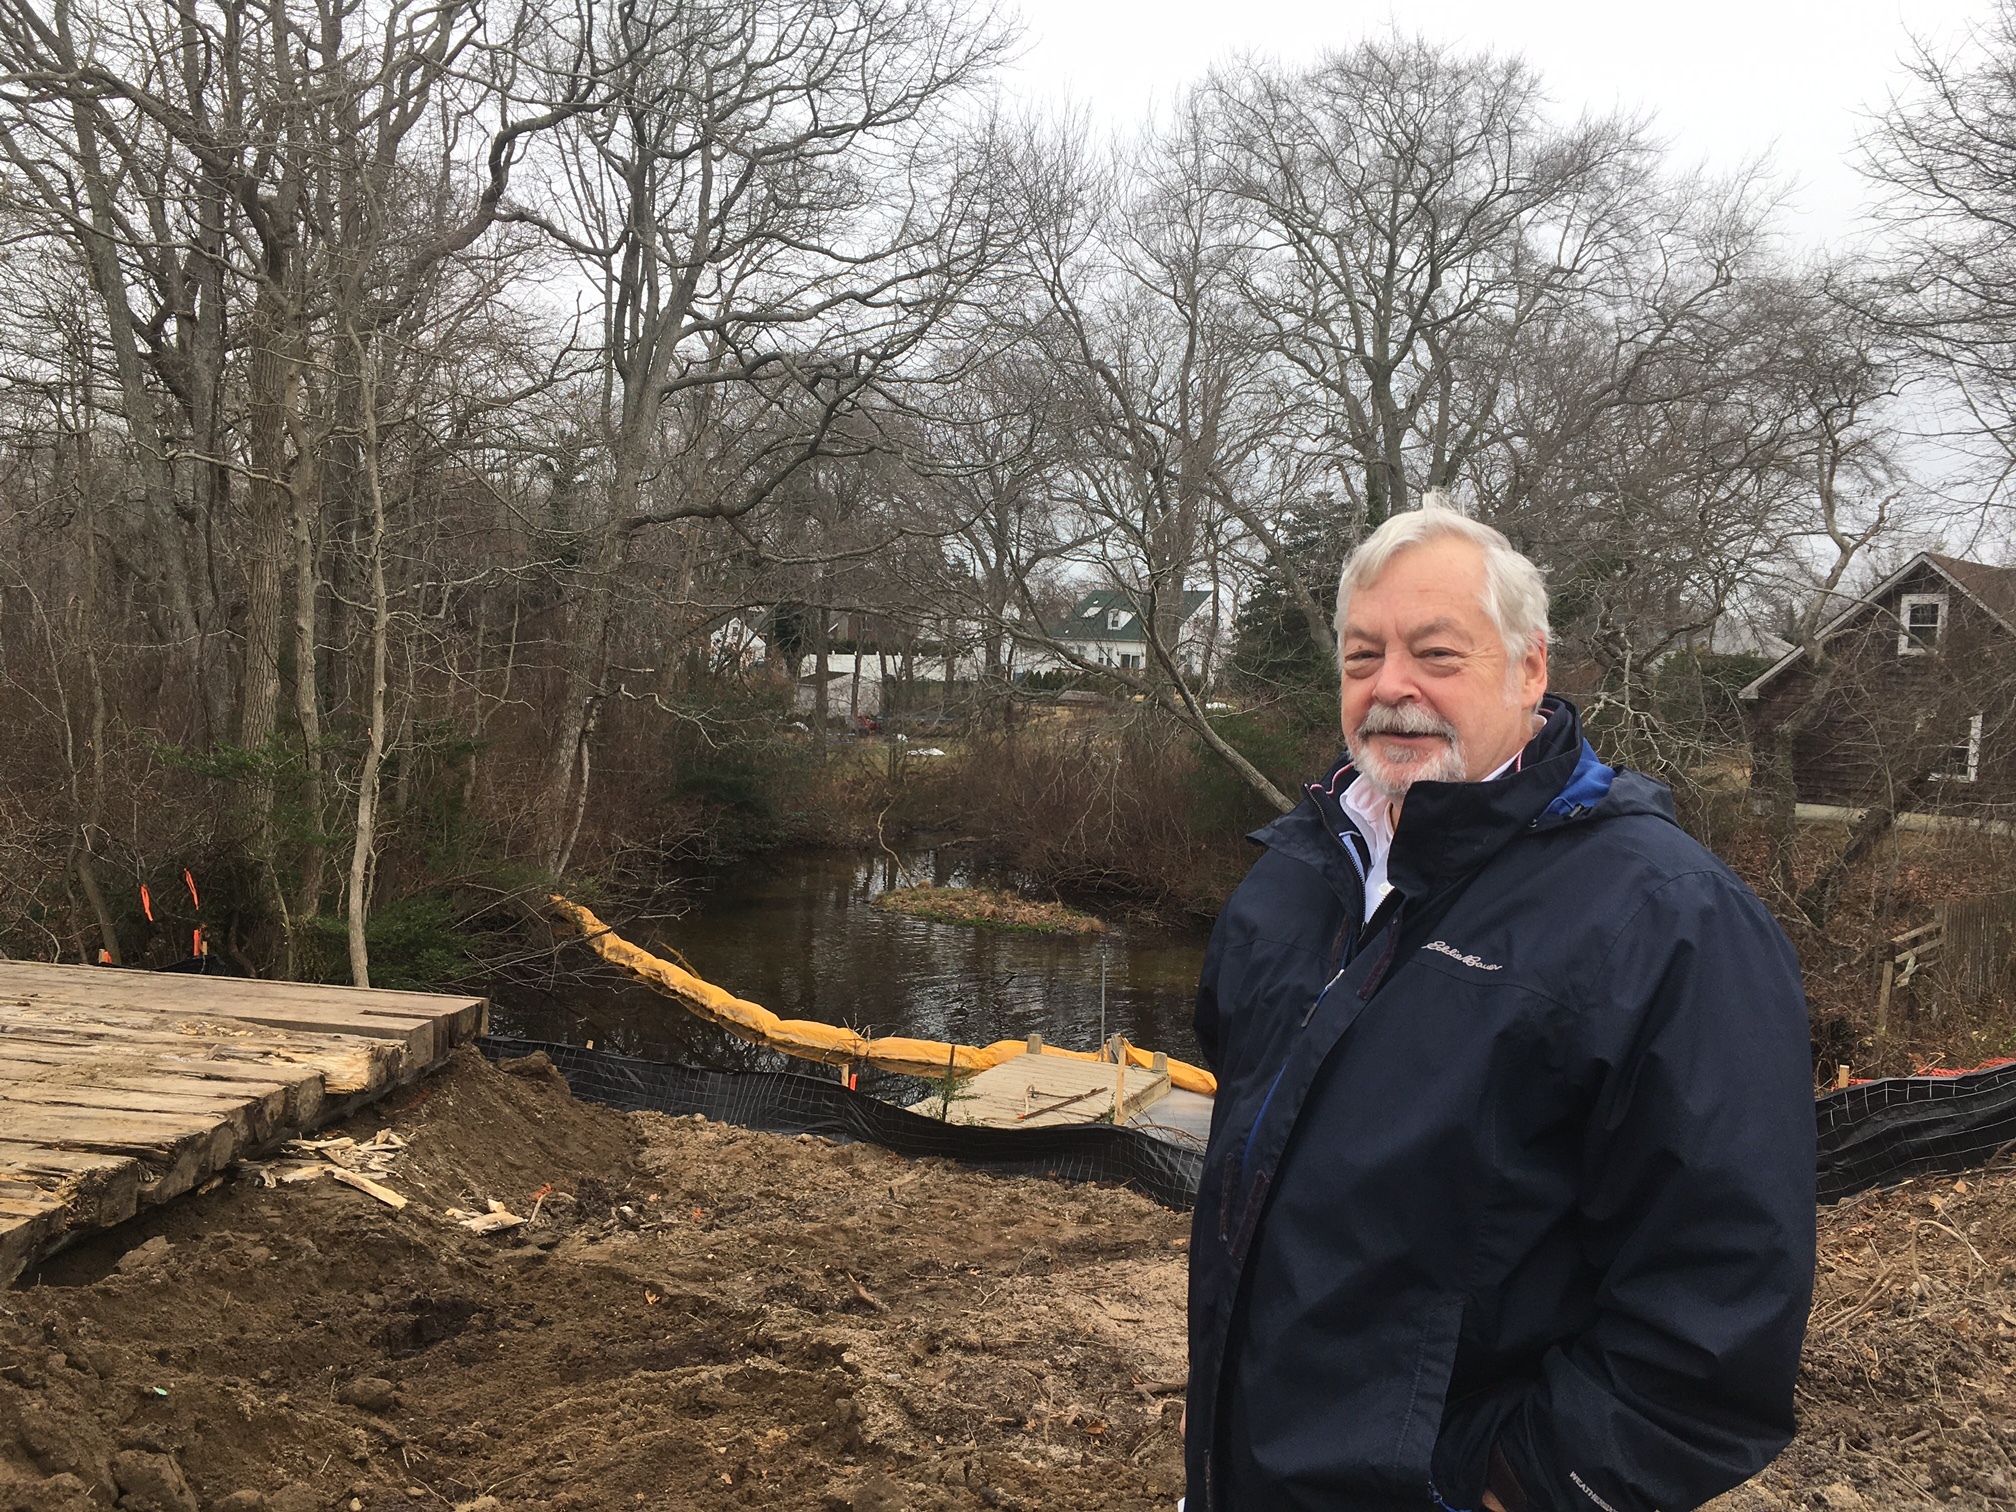 Southampton Town Councilman John Bouvier at the Woodhull Dam project in Riverside.